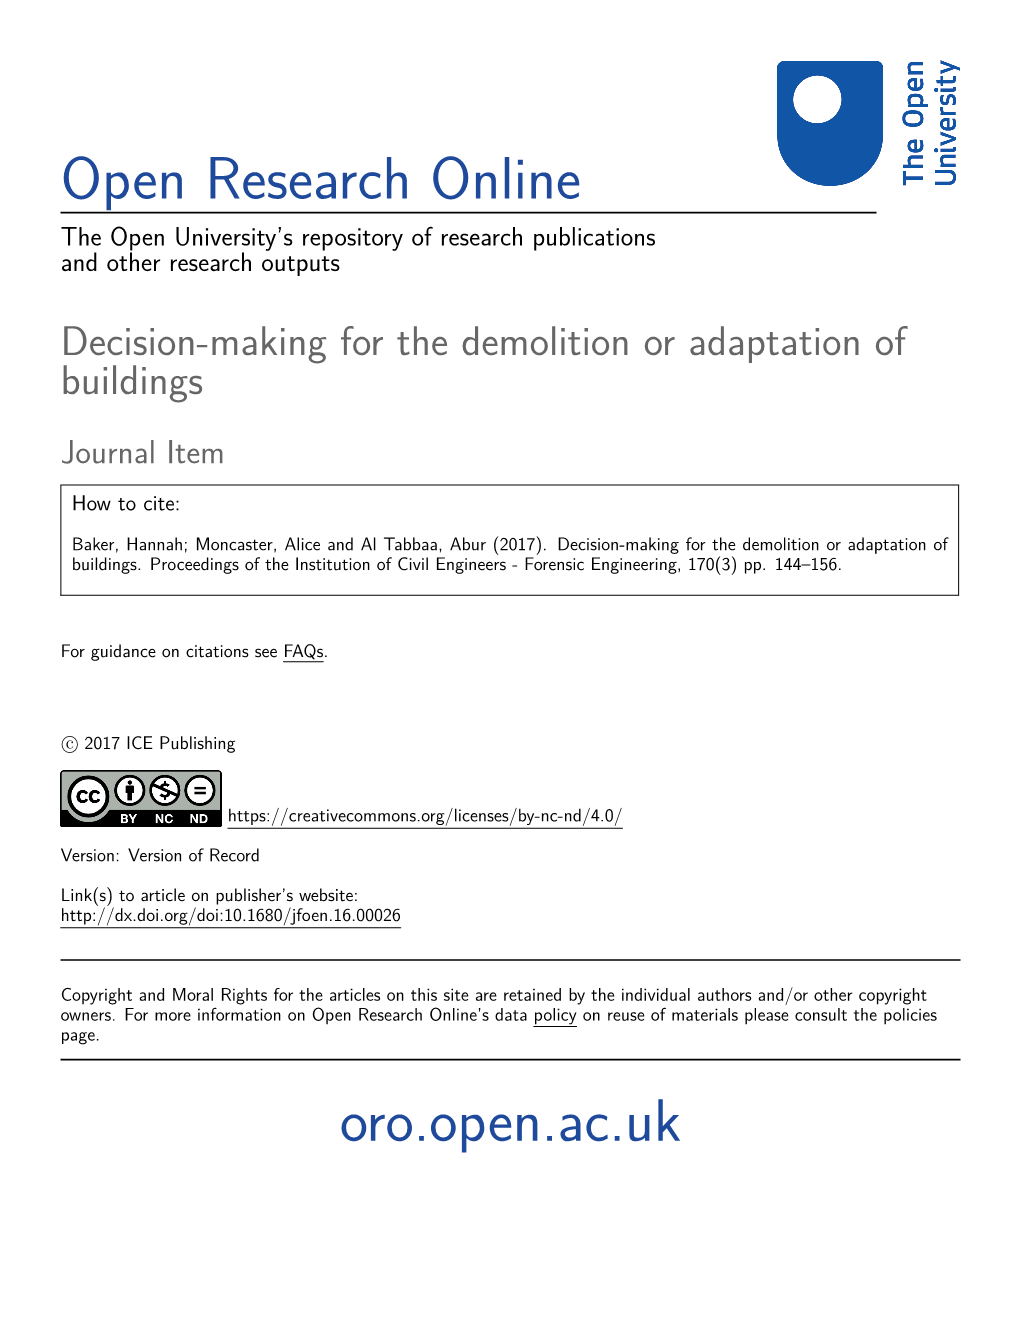 Decision-Making for the Demolition Or Adaptation of Buildings